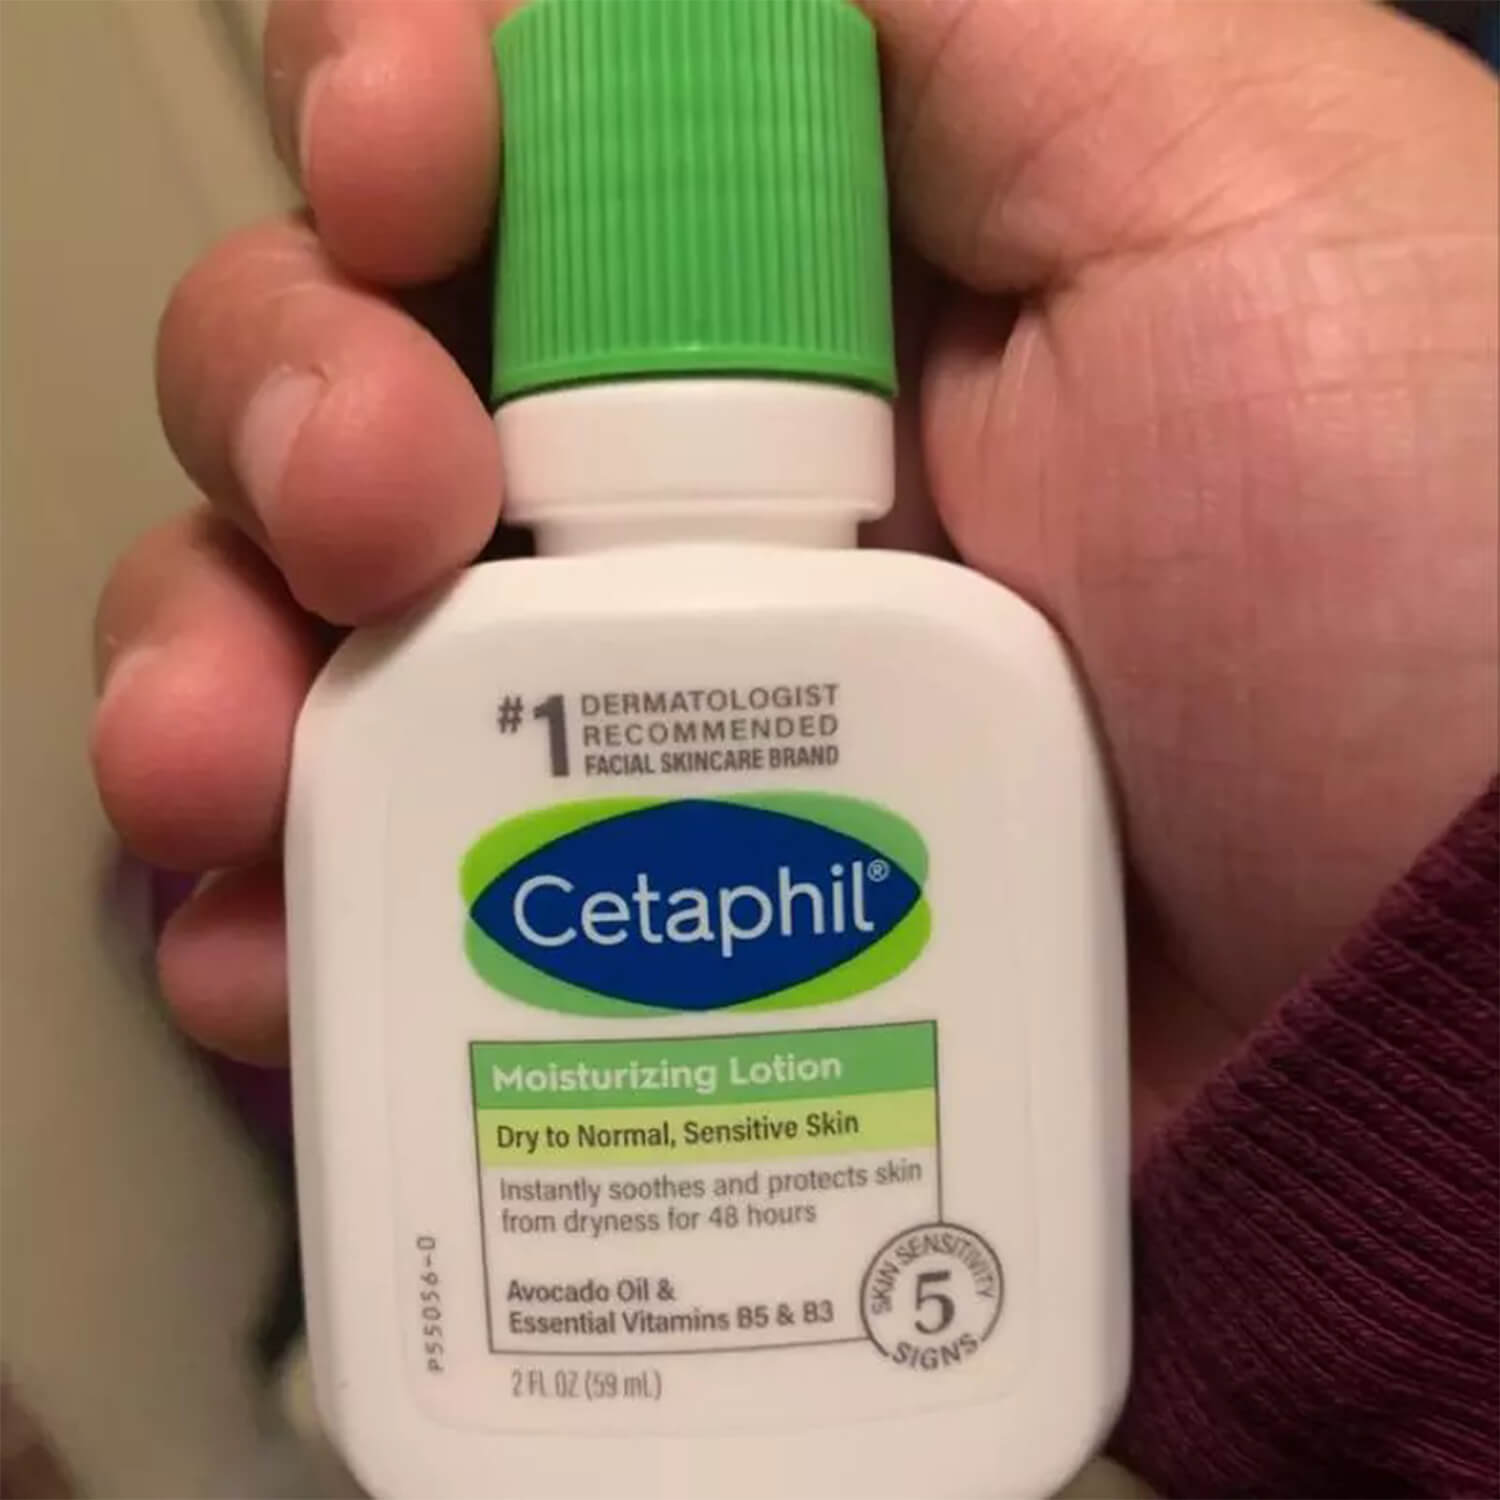 Cetaphil Moisturizing Lotion Travel Size 59ml for dry skin available in Karachi, Lahore, Islamabad across Pakistan